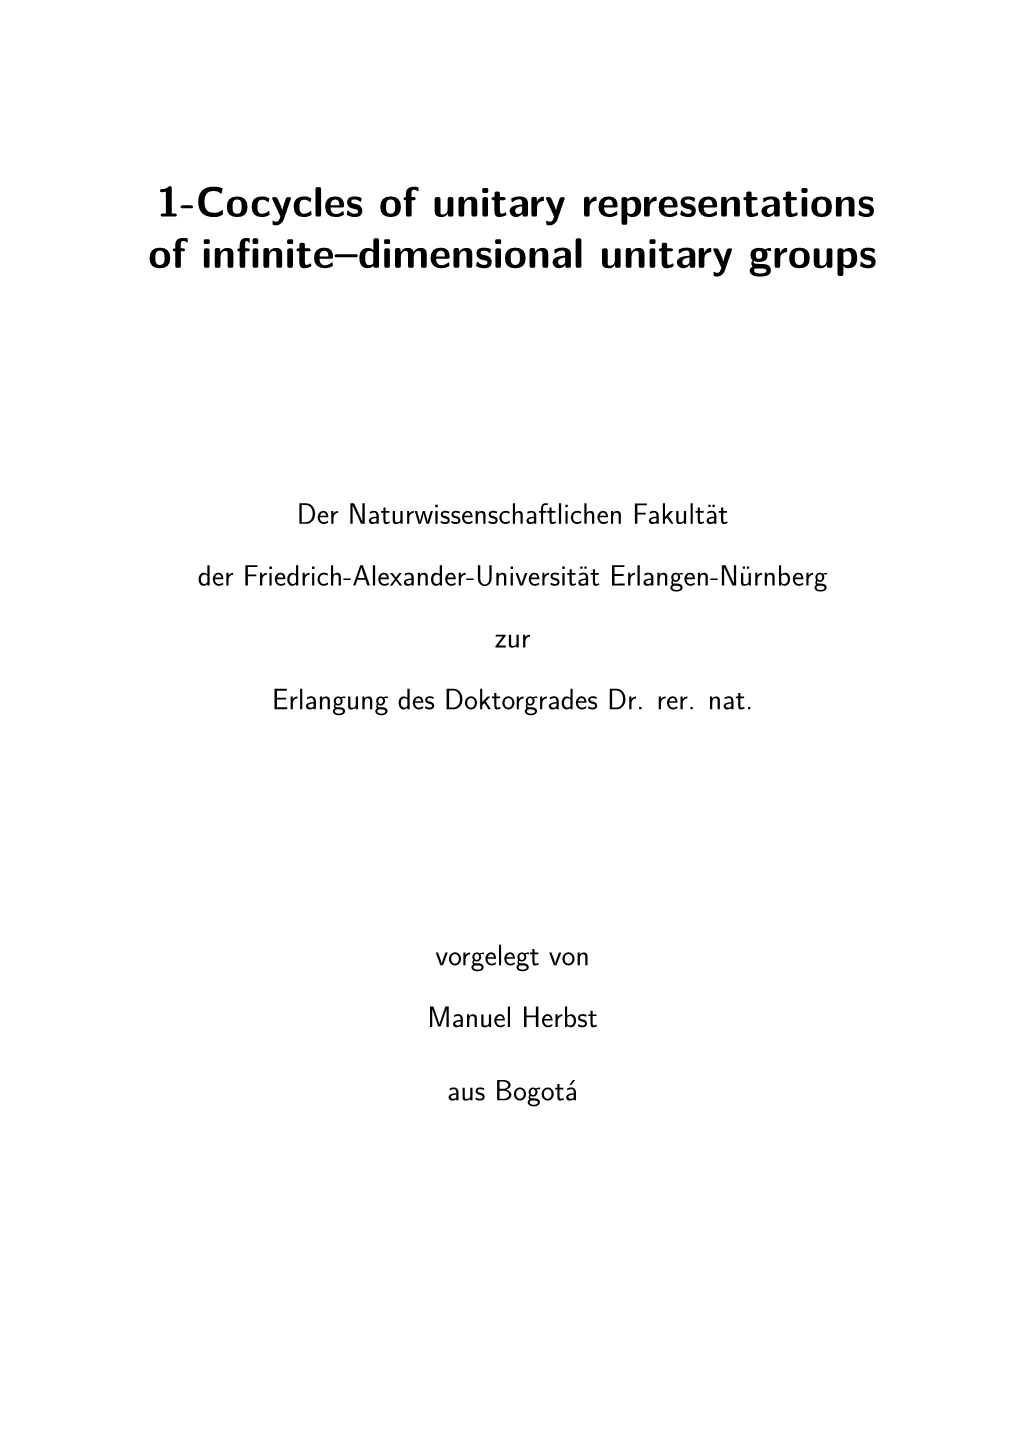 1-Cocycles of Unitary Representations of Infinite–Dimensional Unitary Groups